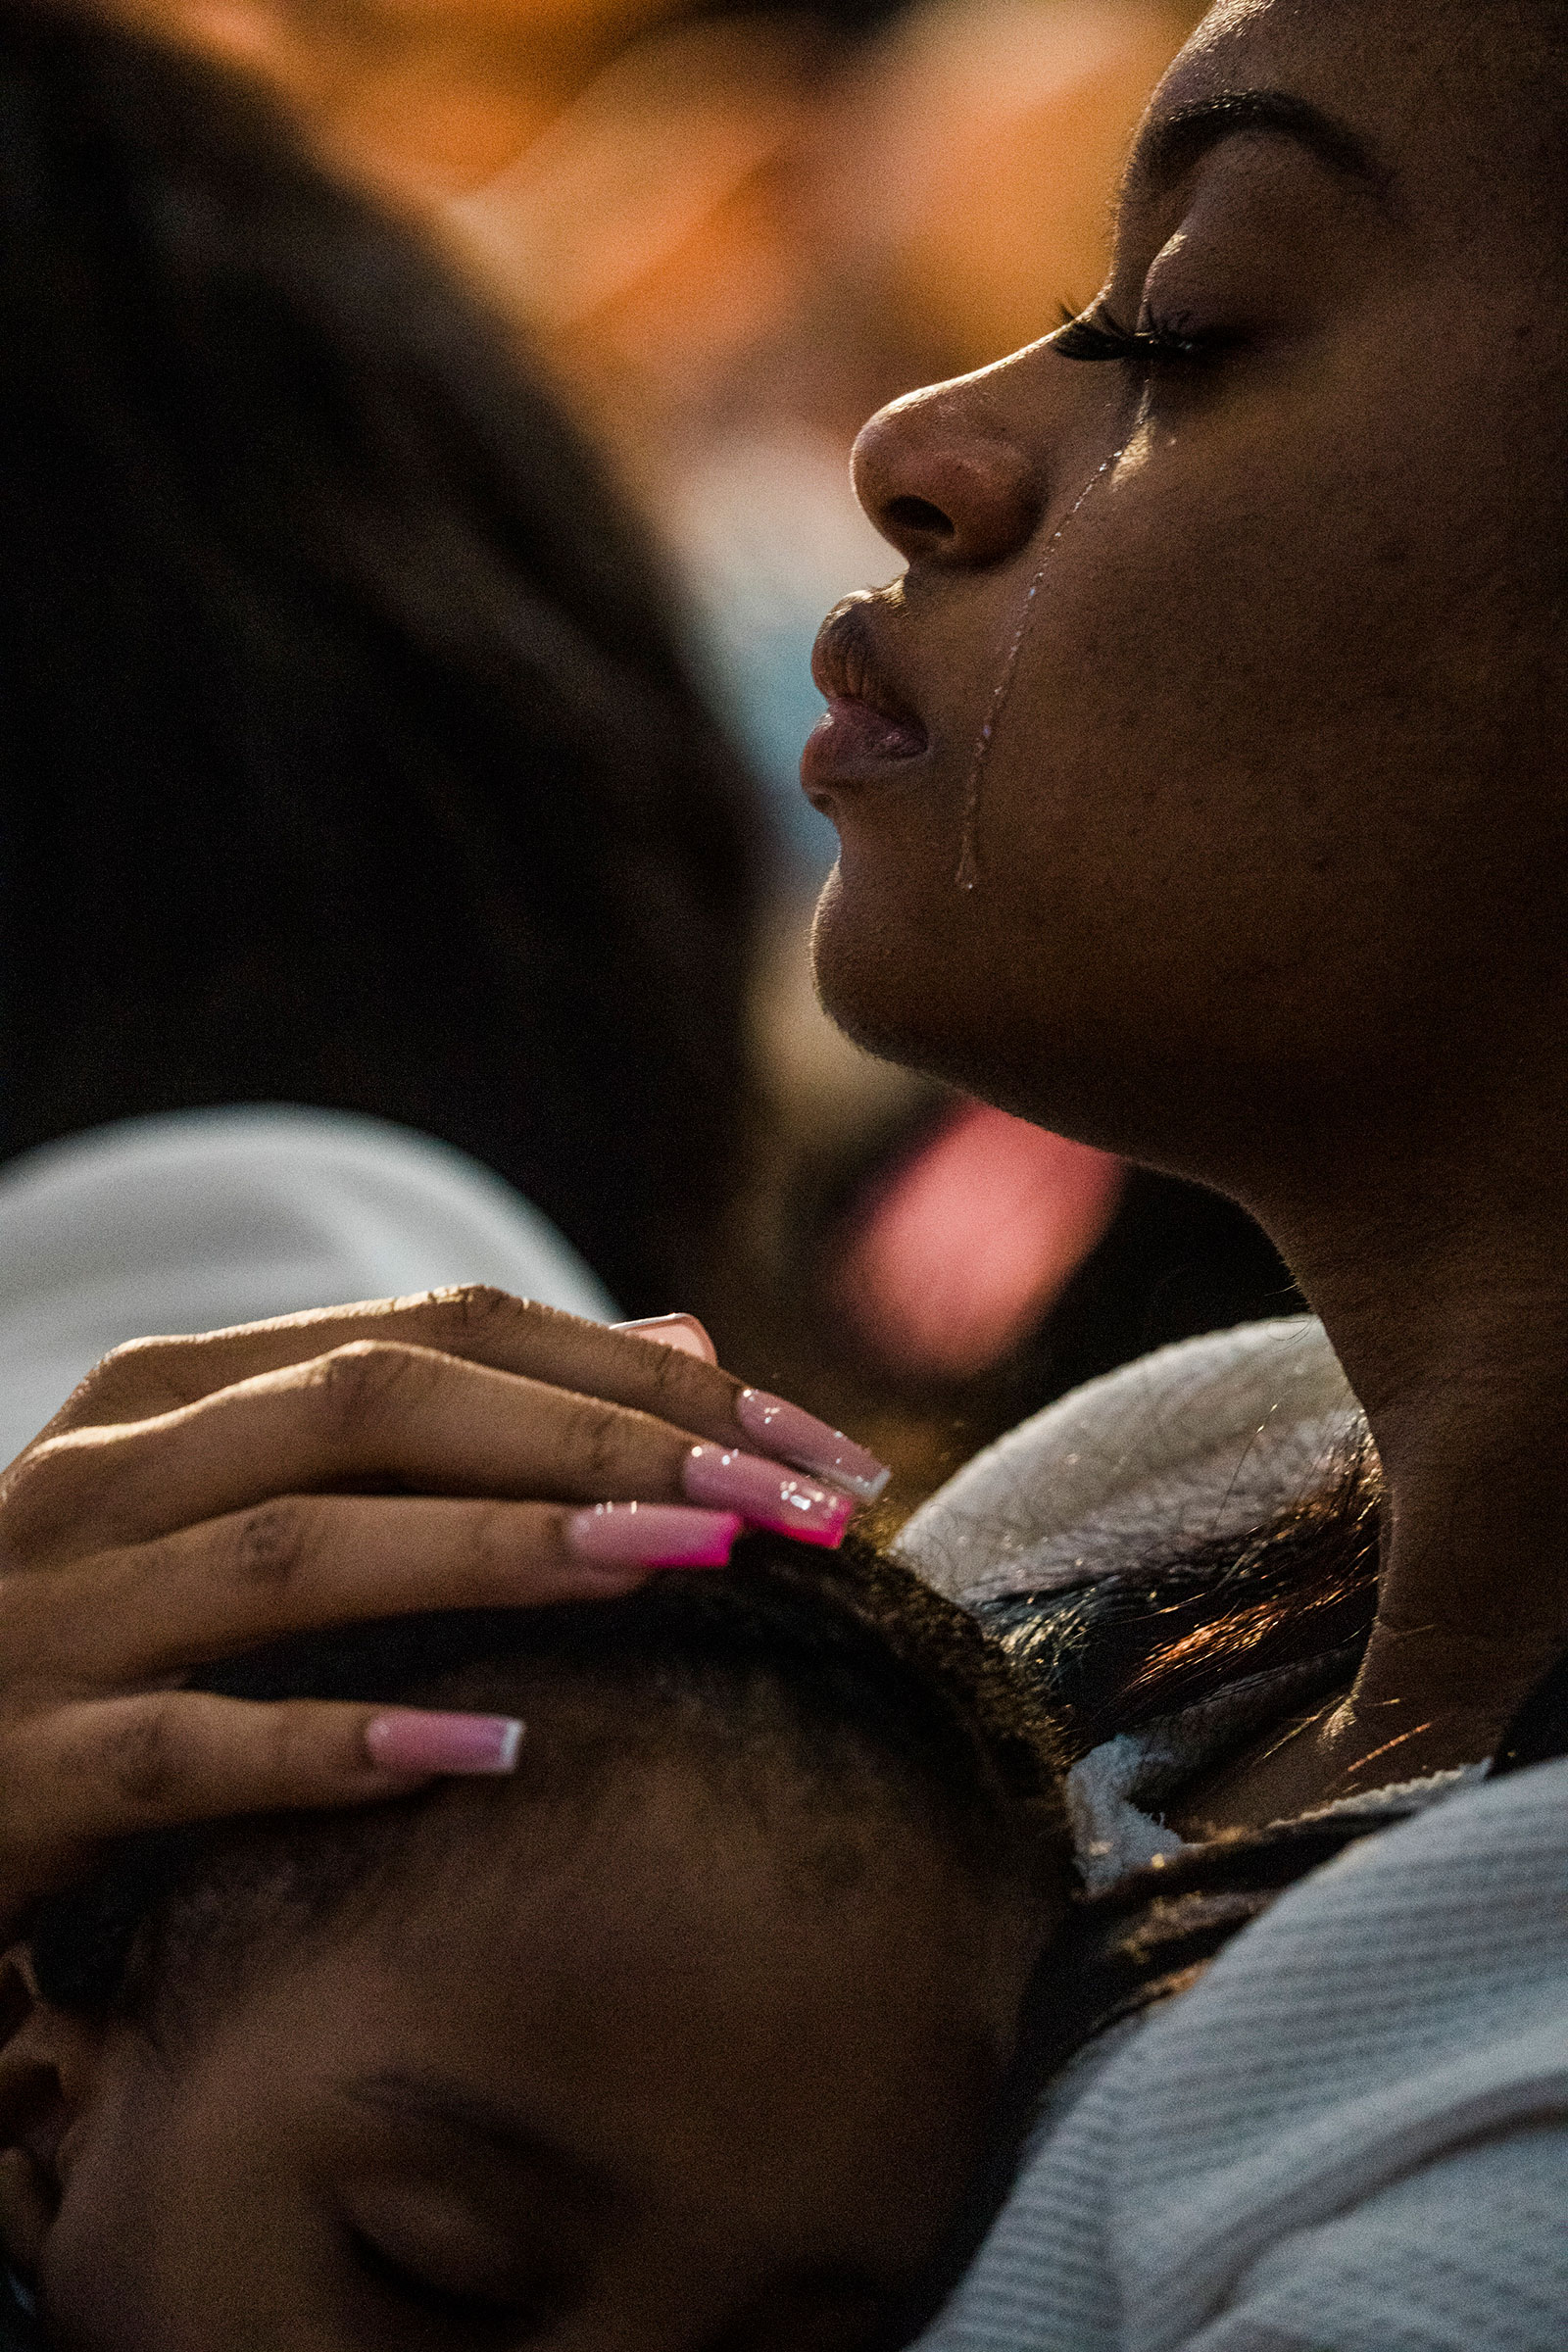 Charon Reed holds her son Koda and cries at the funeral of her grandmother, one of 10 killed in the racist massacre at a Tops grocery store, in Buffalo, N.Y., on May 24.